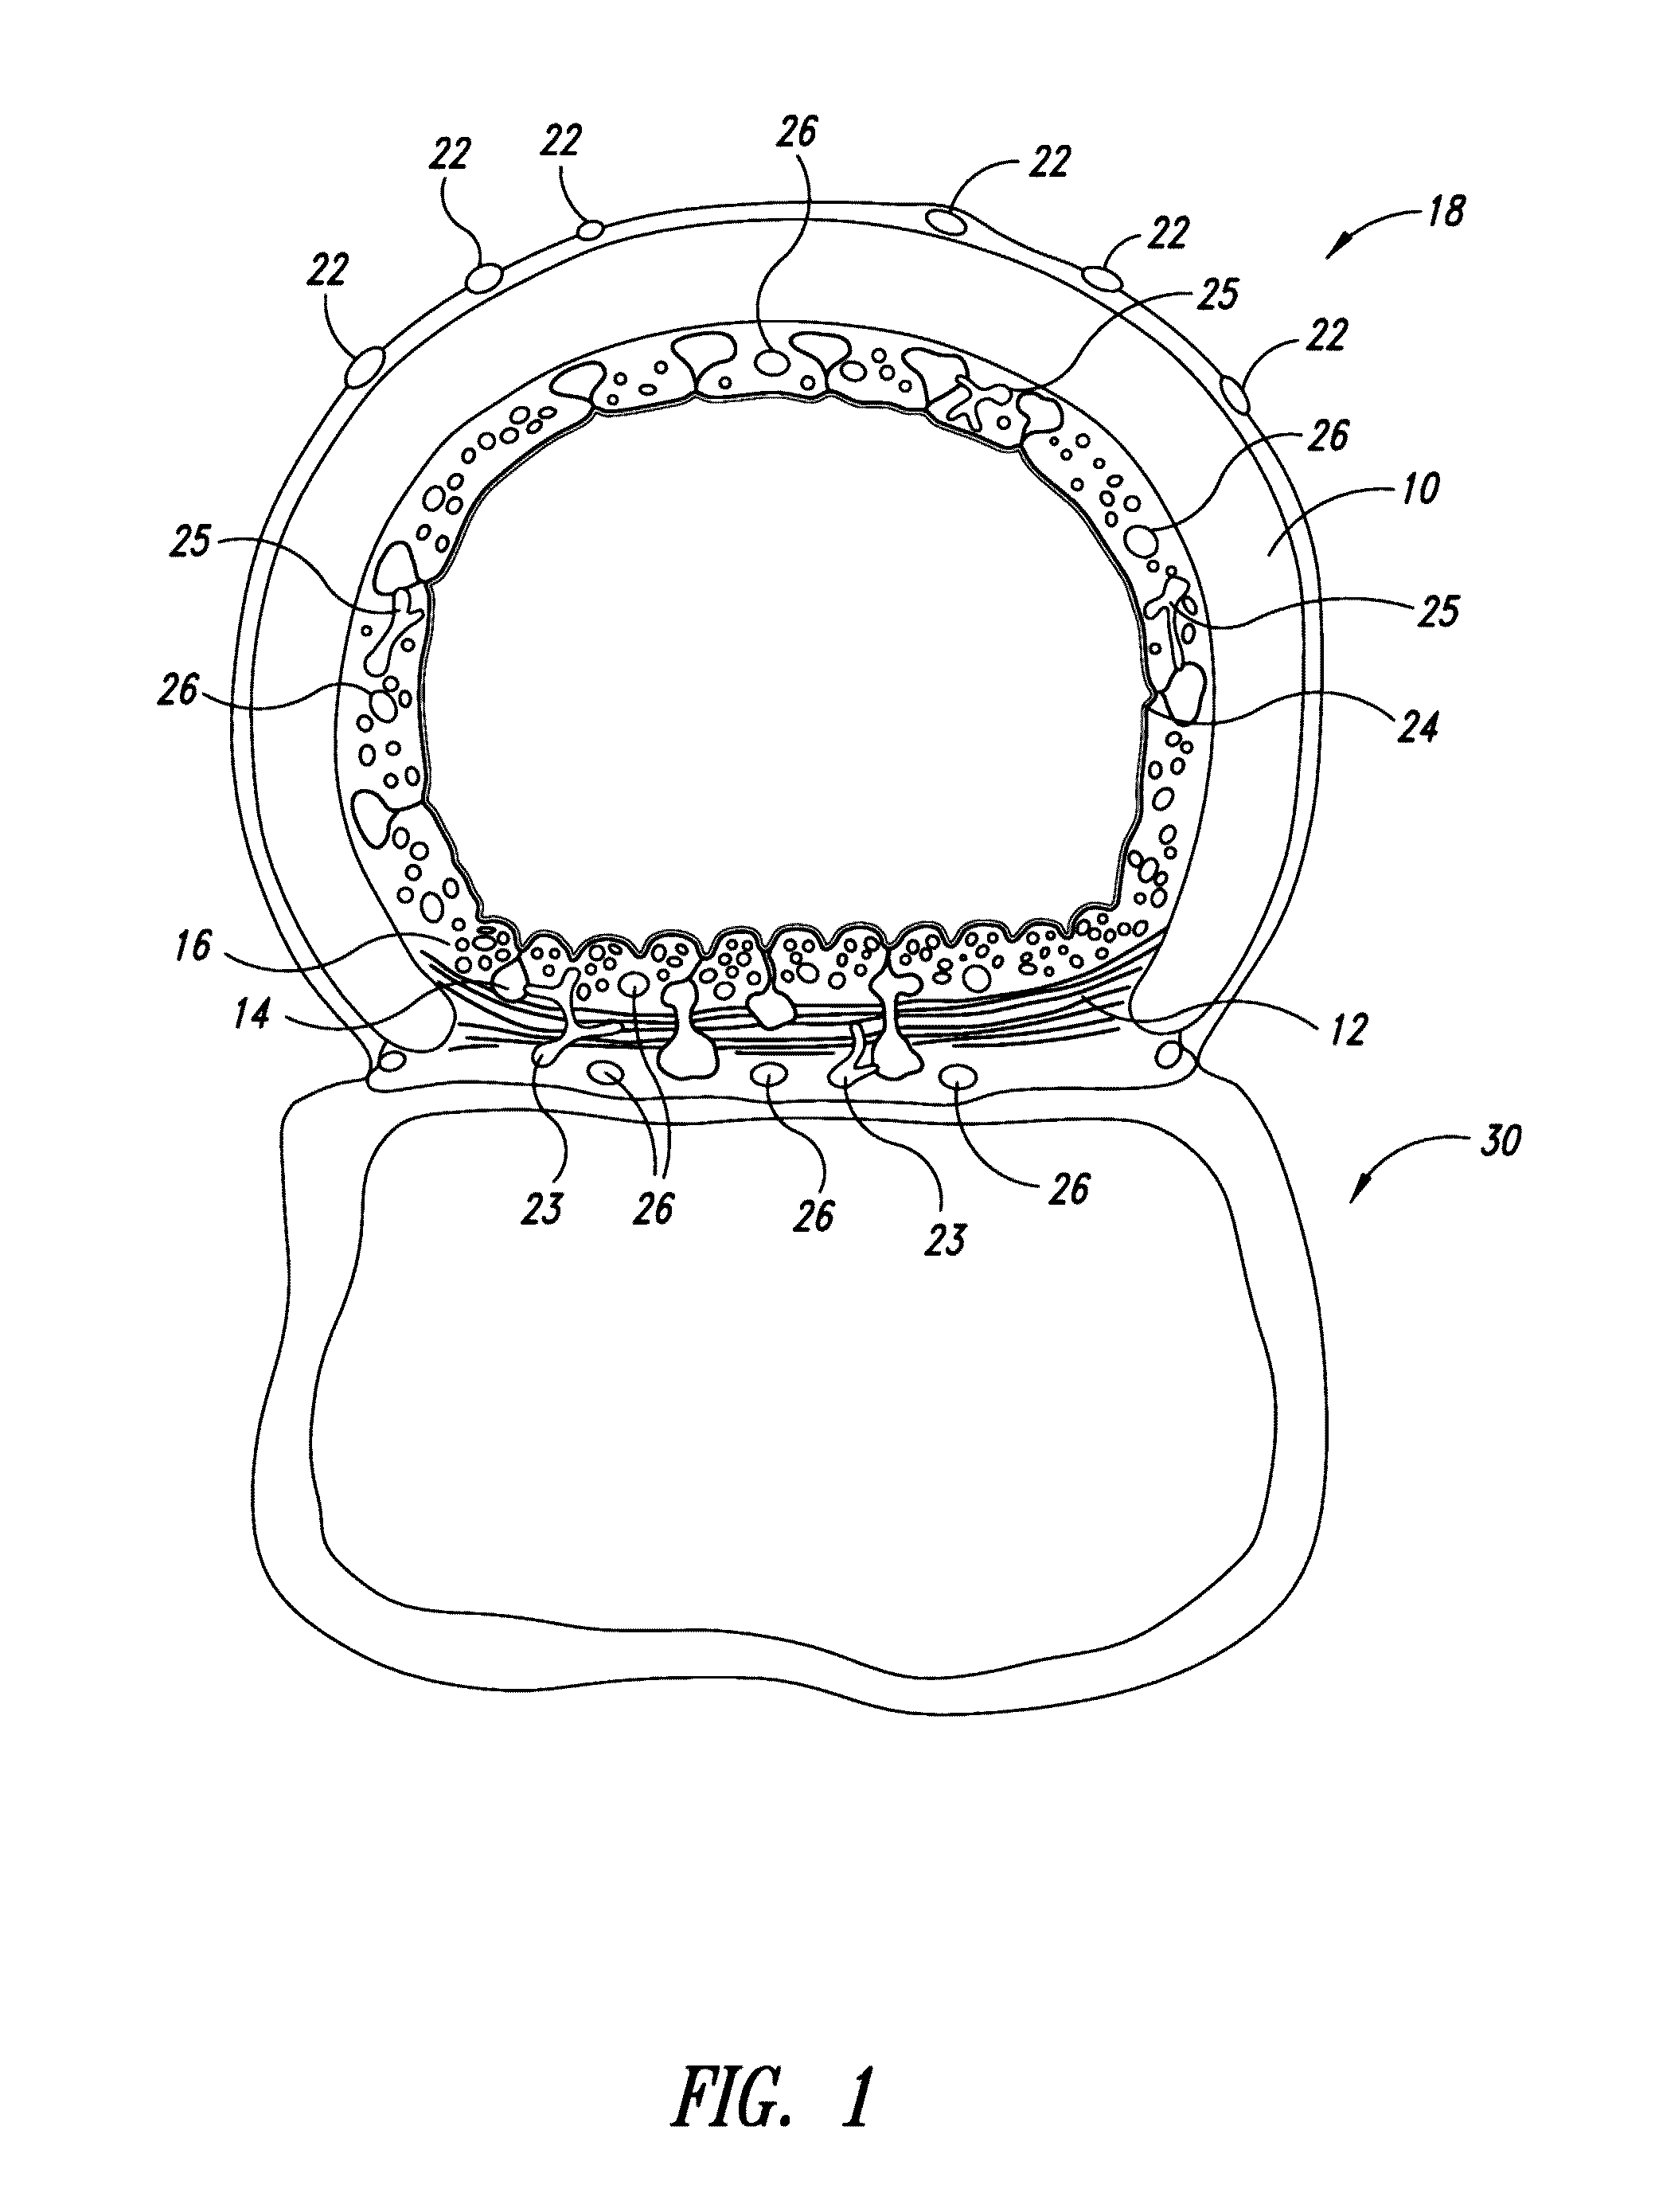 System and method for pulmonary treatment